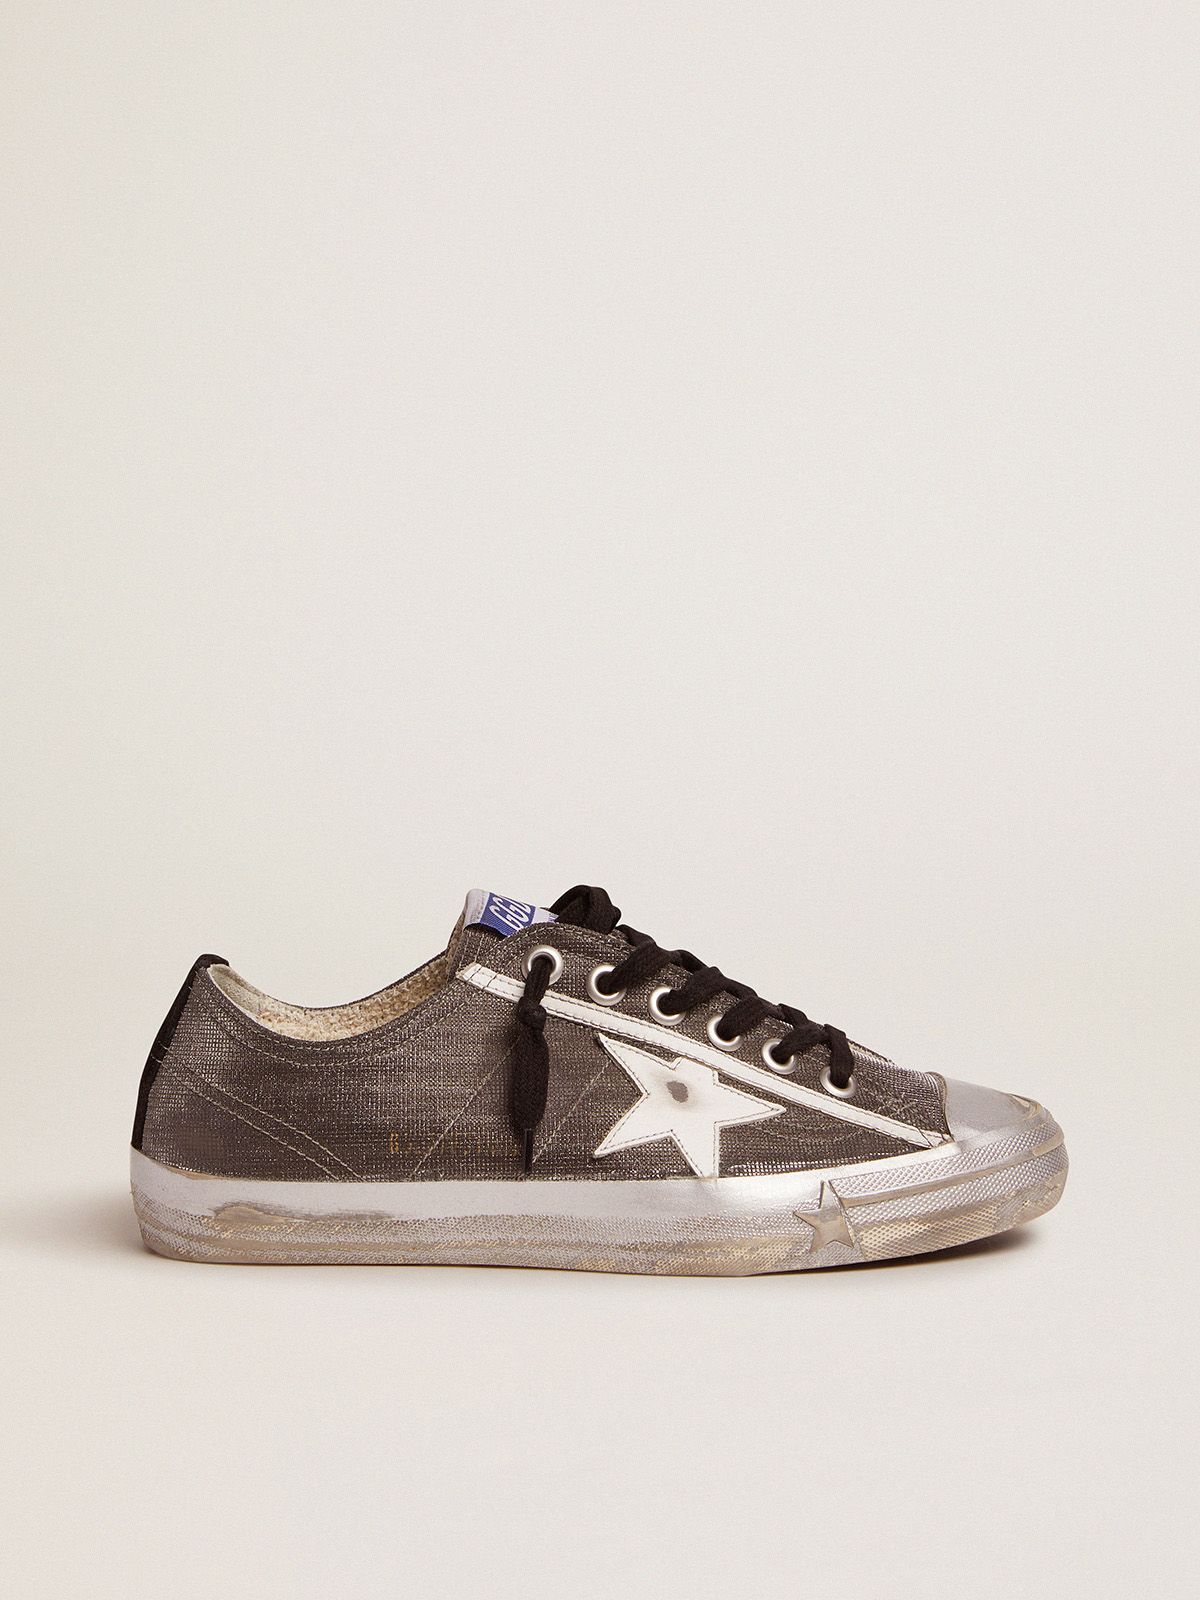 golden goose white checkered sneakers Dark with star LTD and pattern V-Star gray